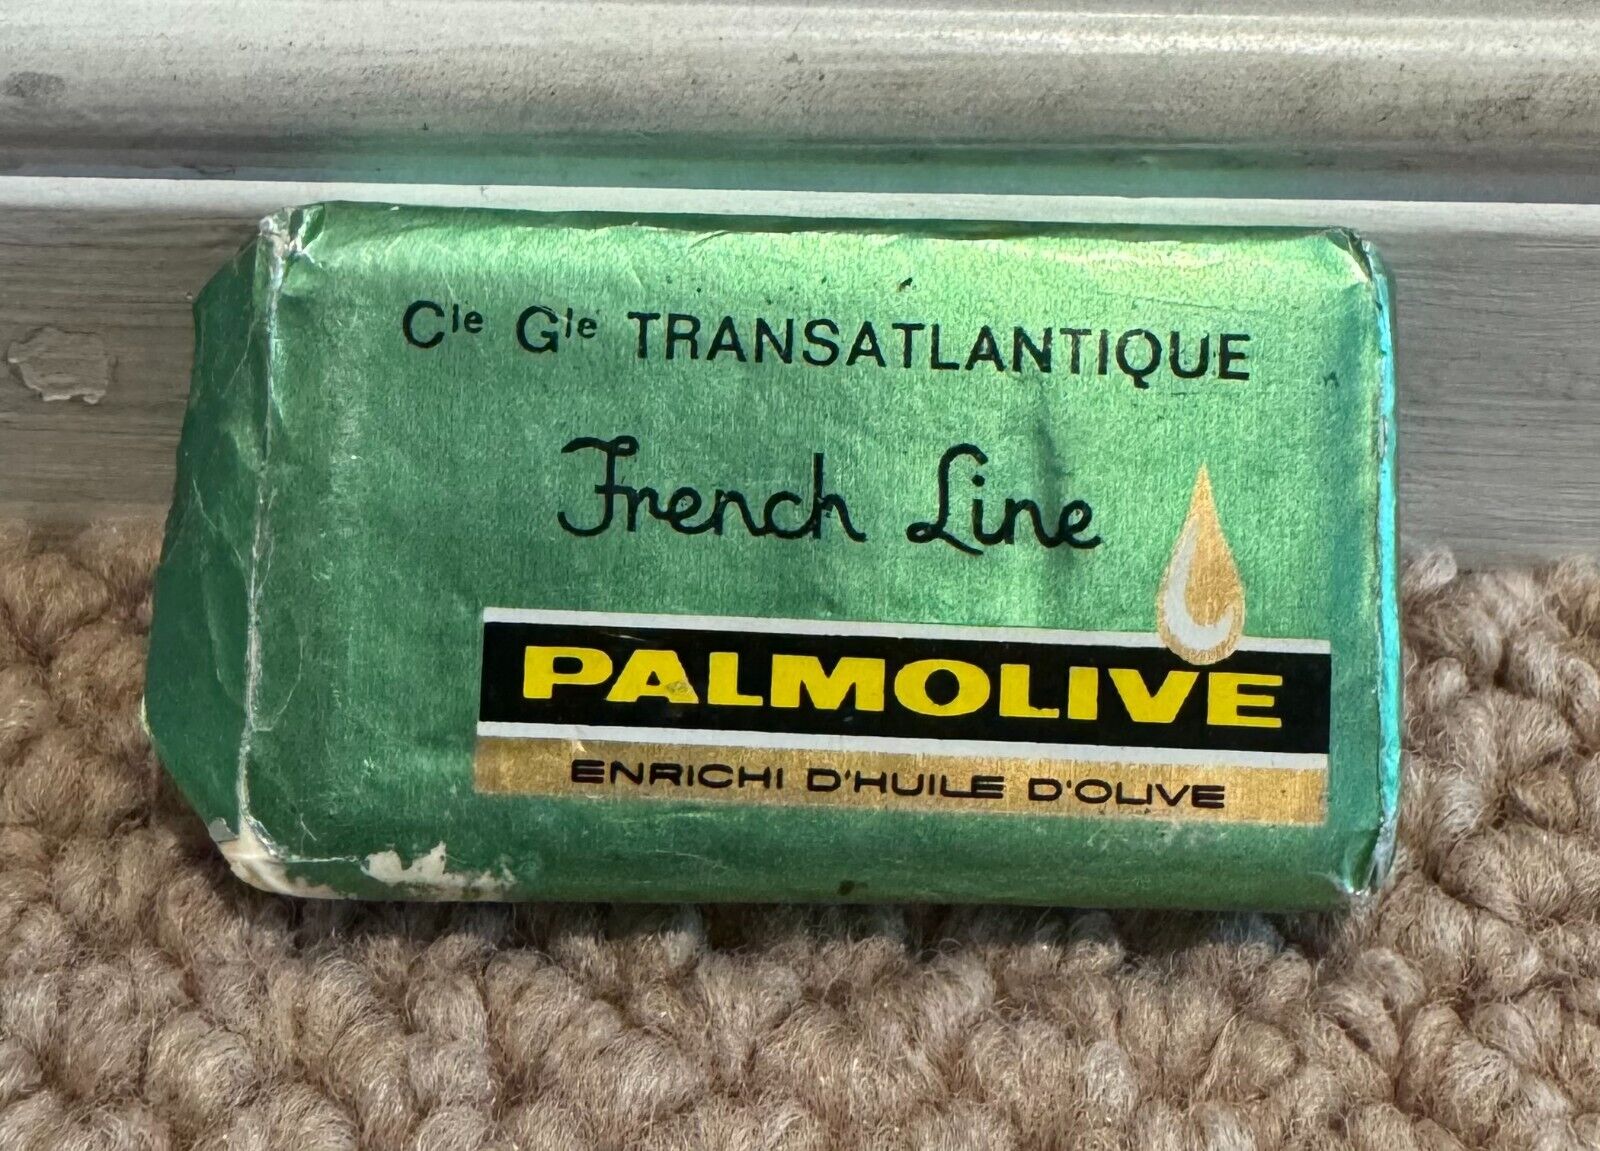 FRENCH LINE S. S. France Palmolive Soap Bar